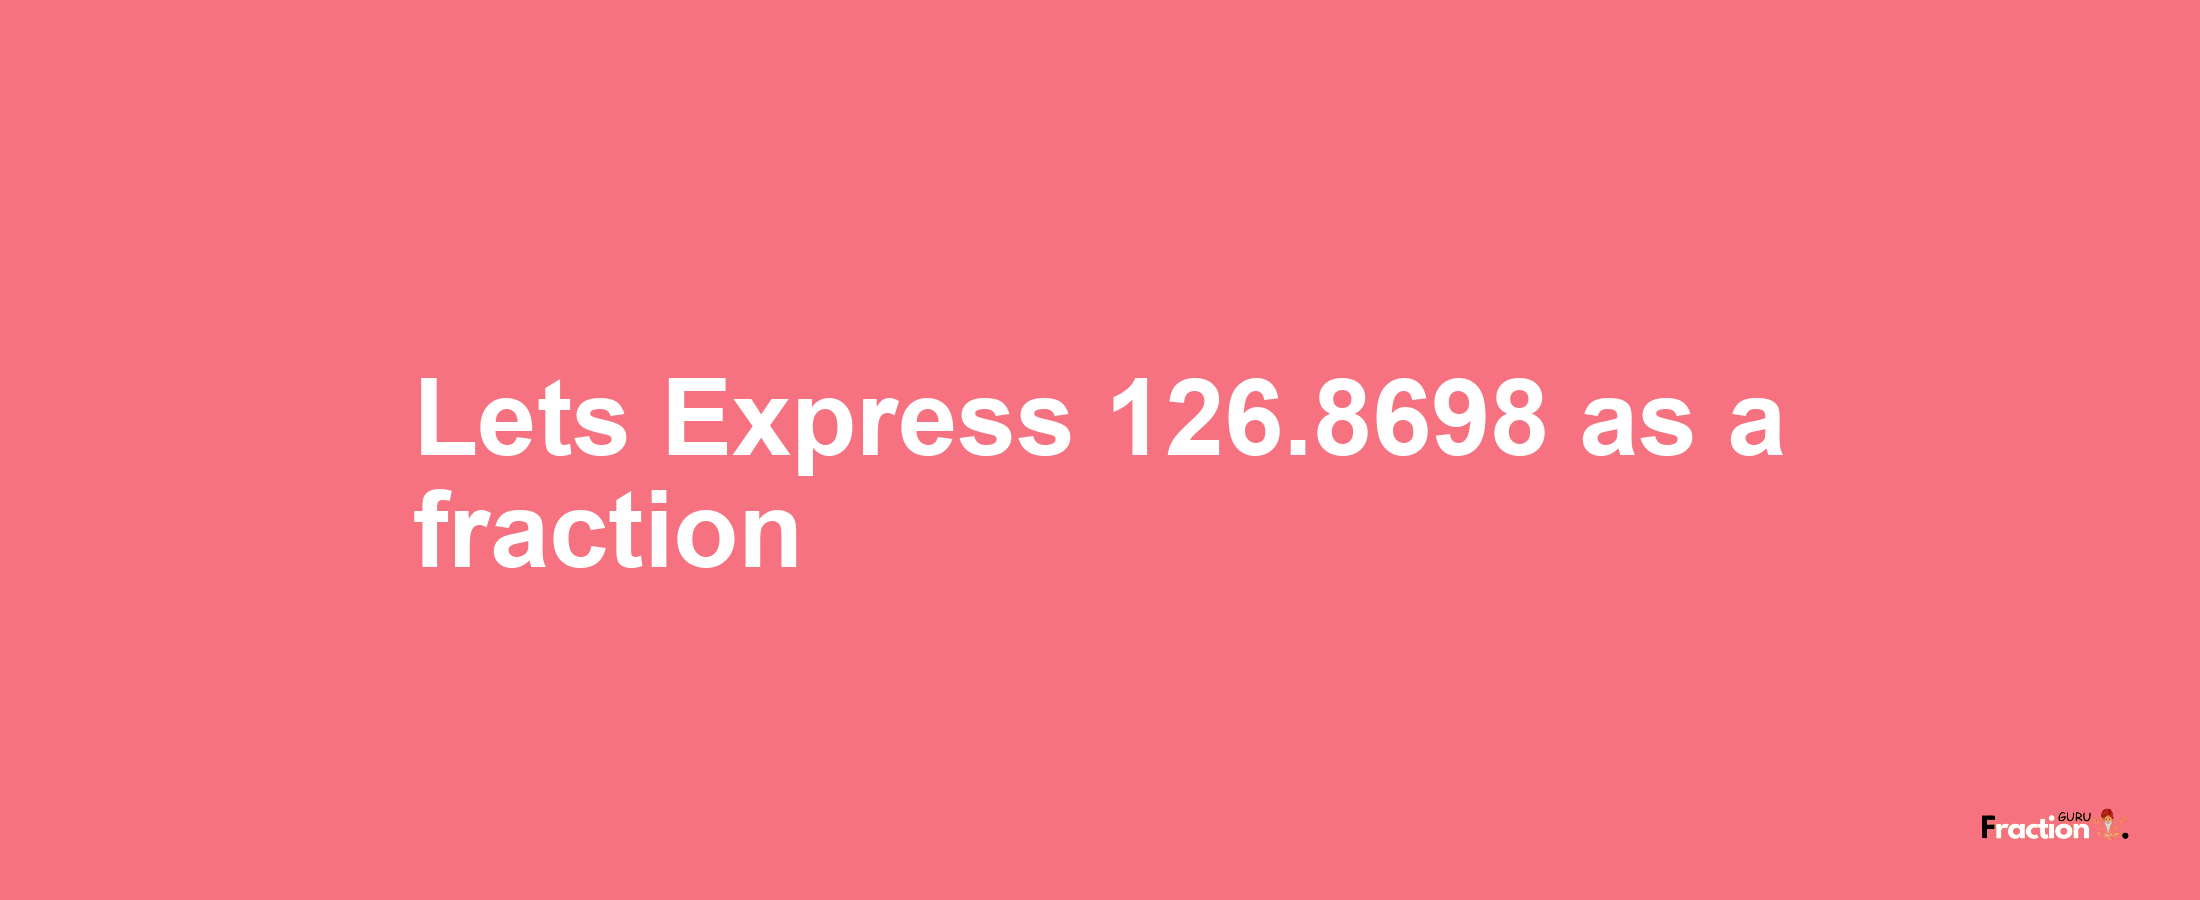 Lets Express 126.8698 as afraction